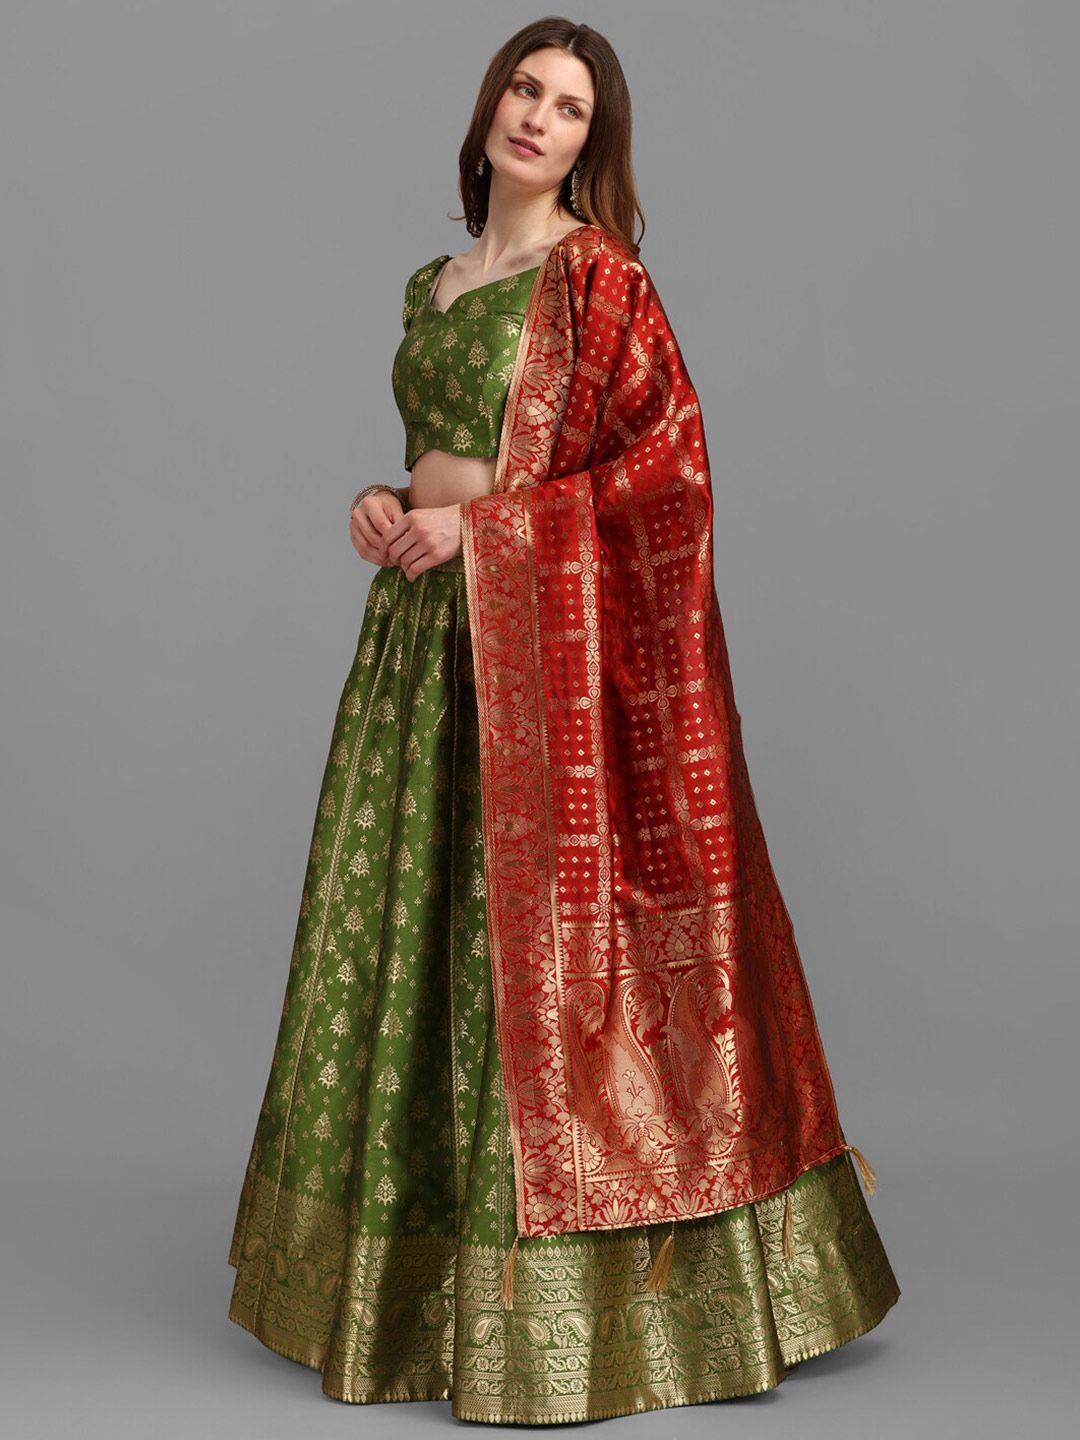 PURVAJA Olive Green & Red Semi-Stitched Lehenga & Unstitched Blouse With Dupatta Price in India